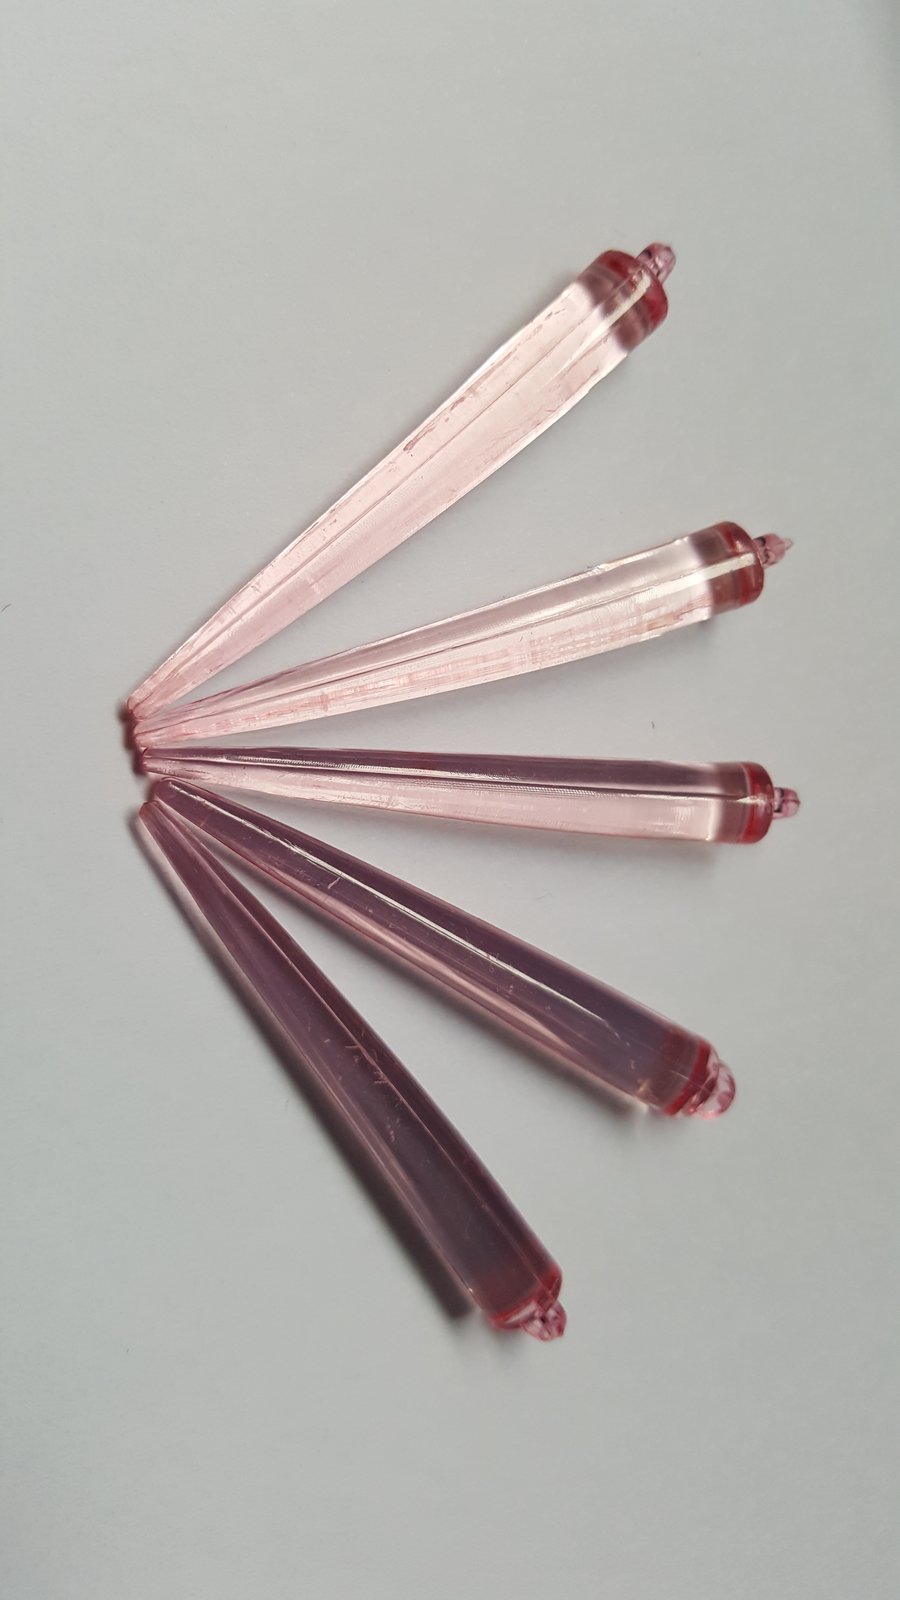 15 x Acrylic Spike Pendant Drops - 52mm - Pale Pink 